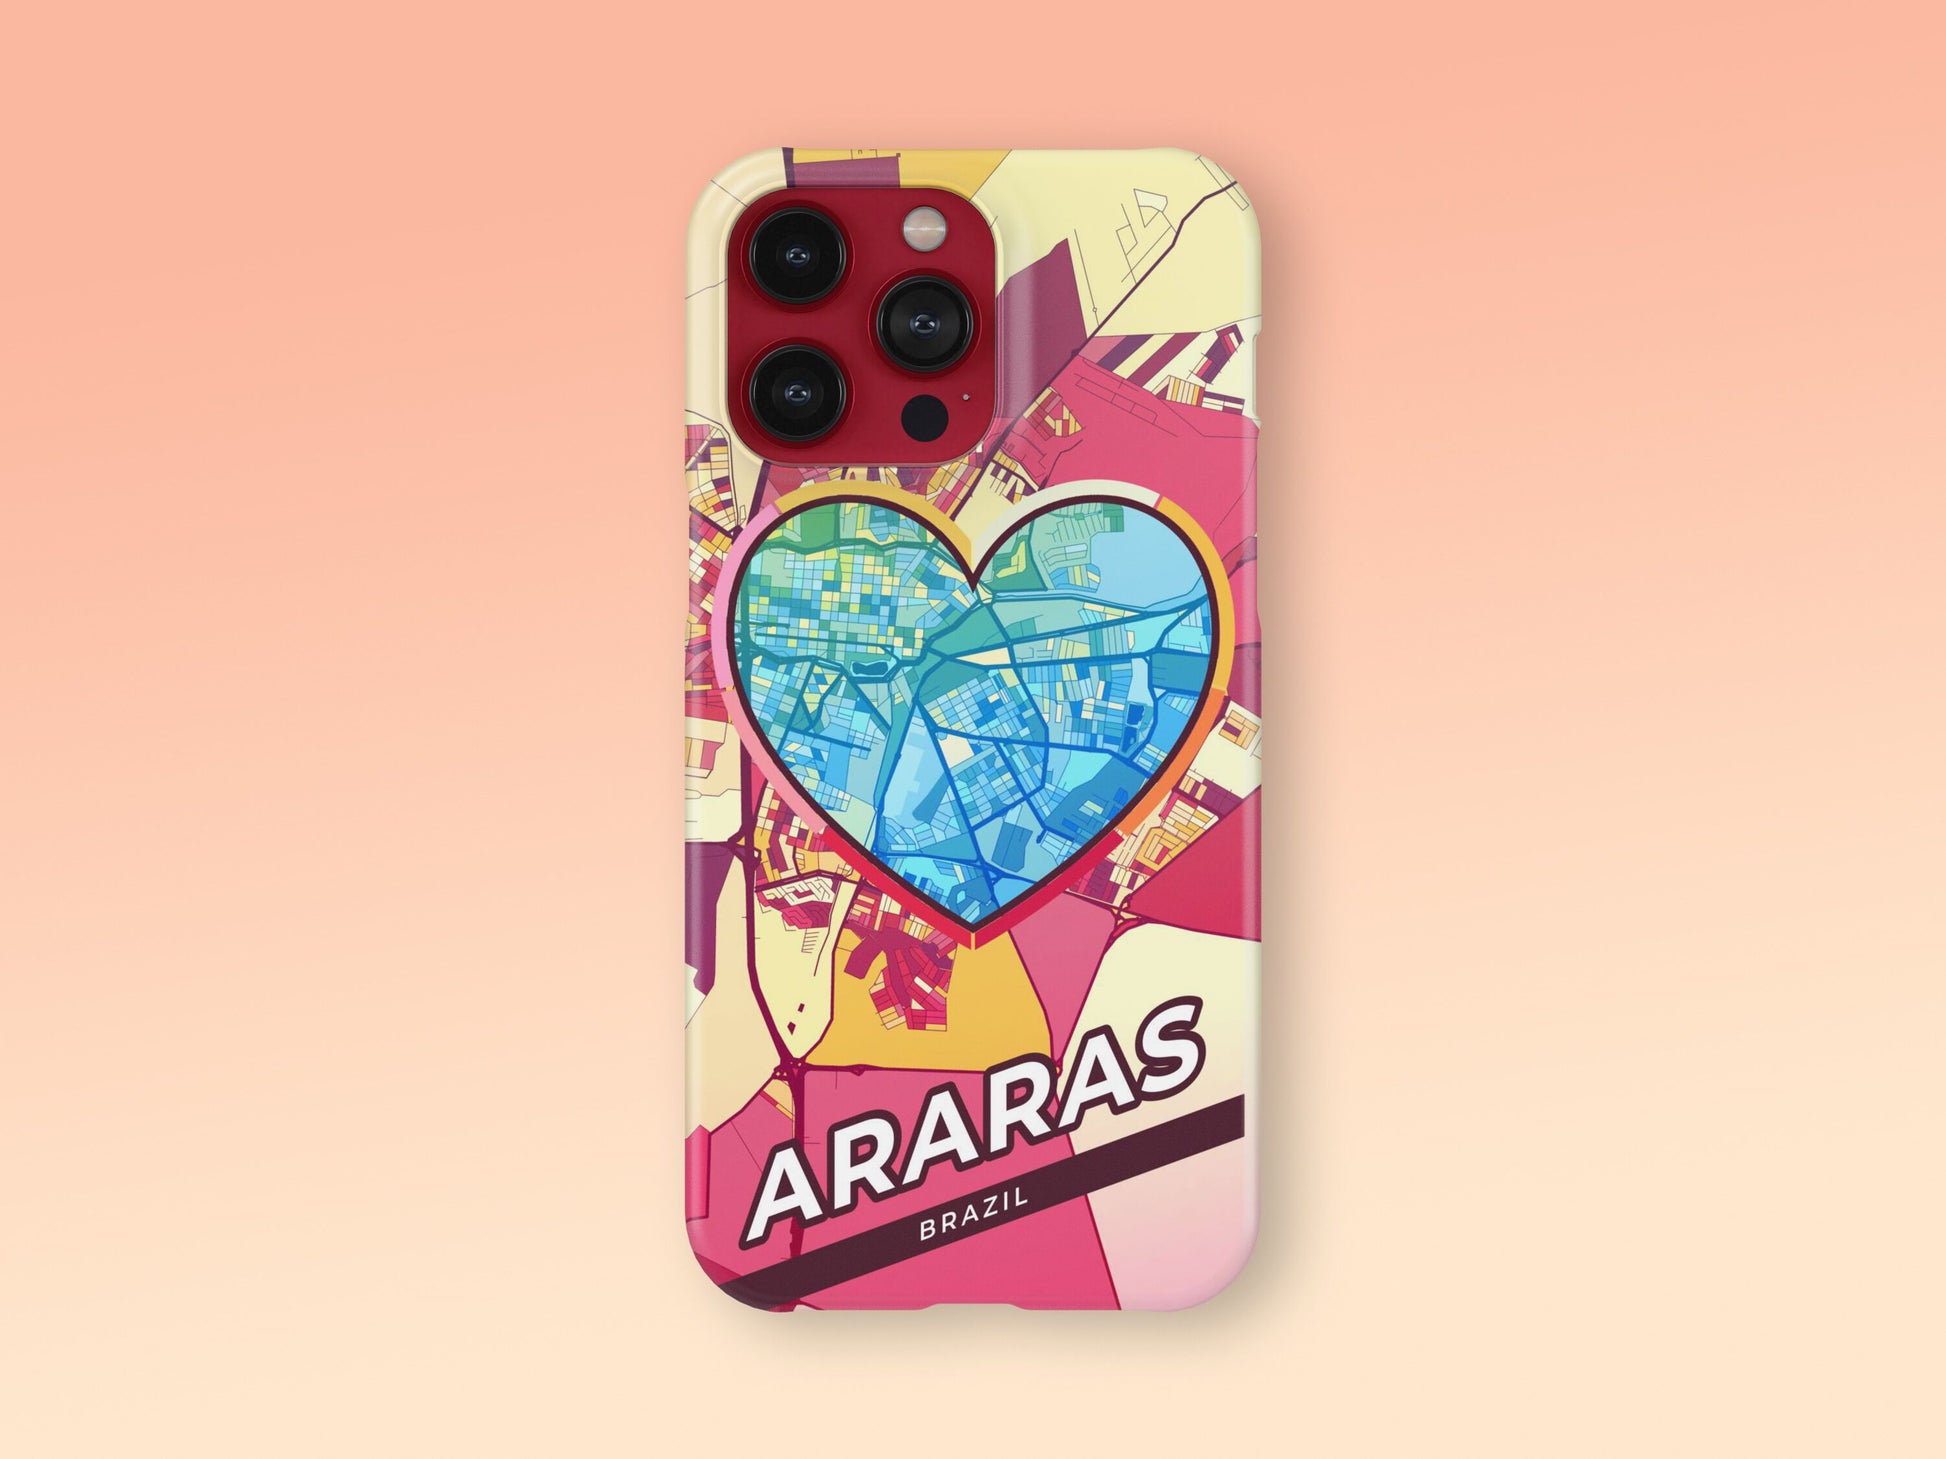 Araras Brazil slim phone case with colorful icon. Birthday, wedding or housewarming gift. Couple match cases. 2